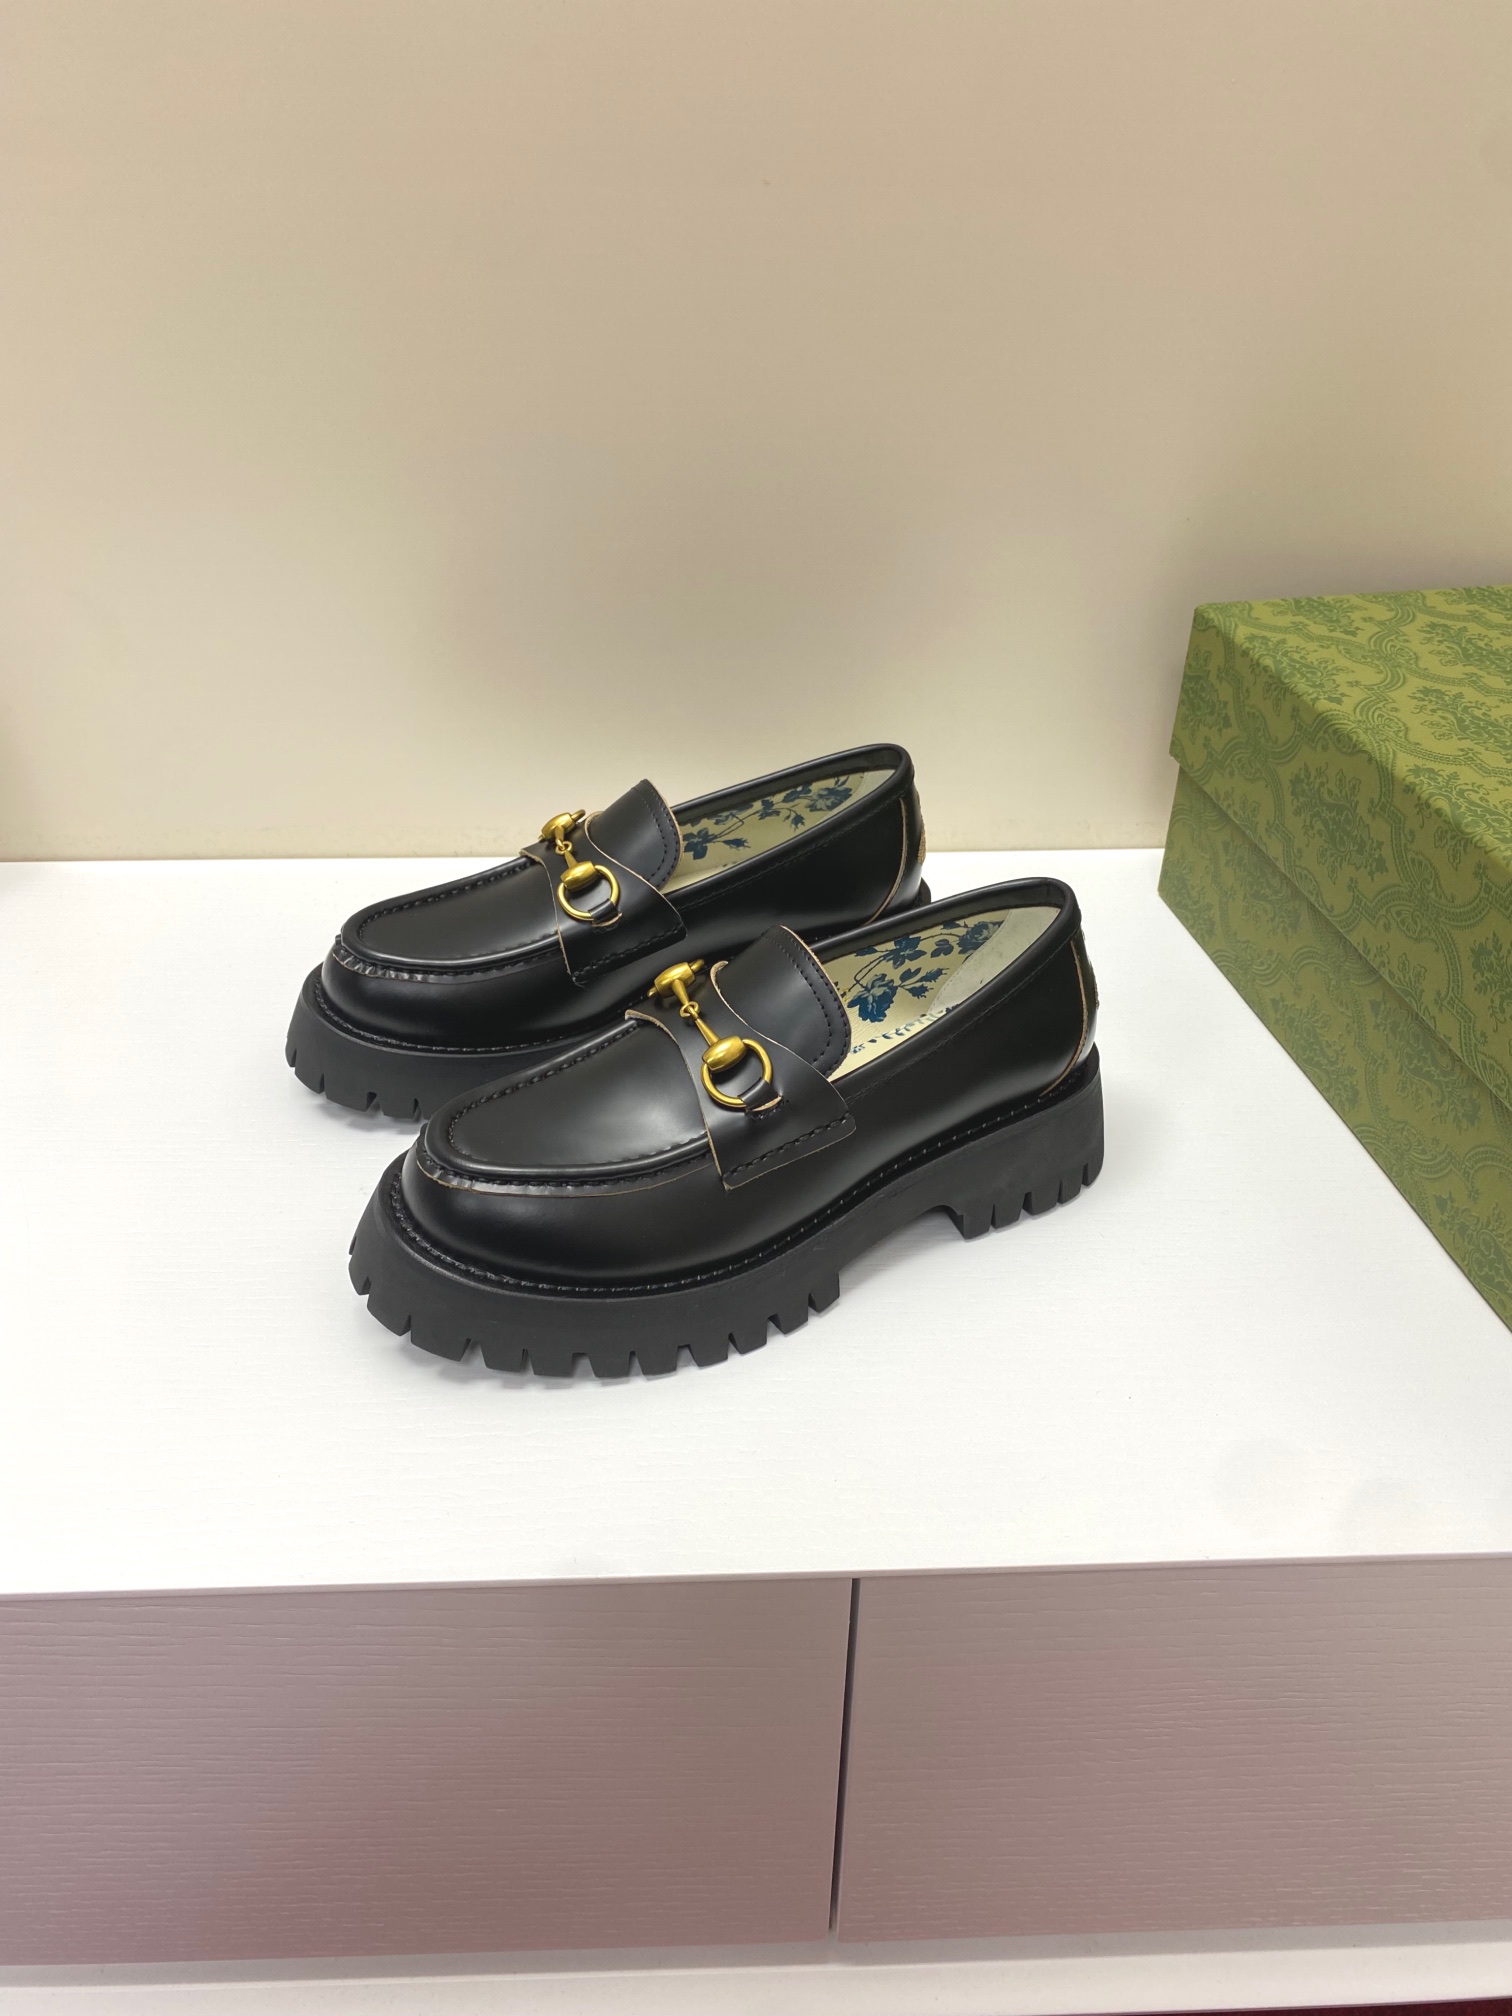 Gucci Shoes Loafers Black Gold Rose Yellow Embroidery Fall/Winter Collection